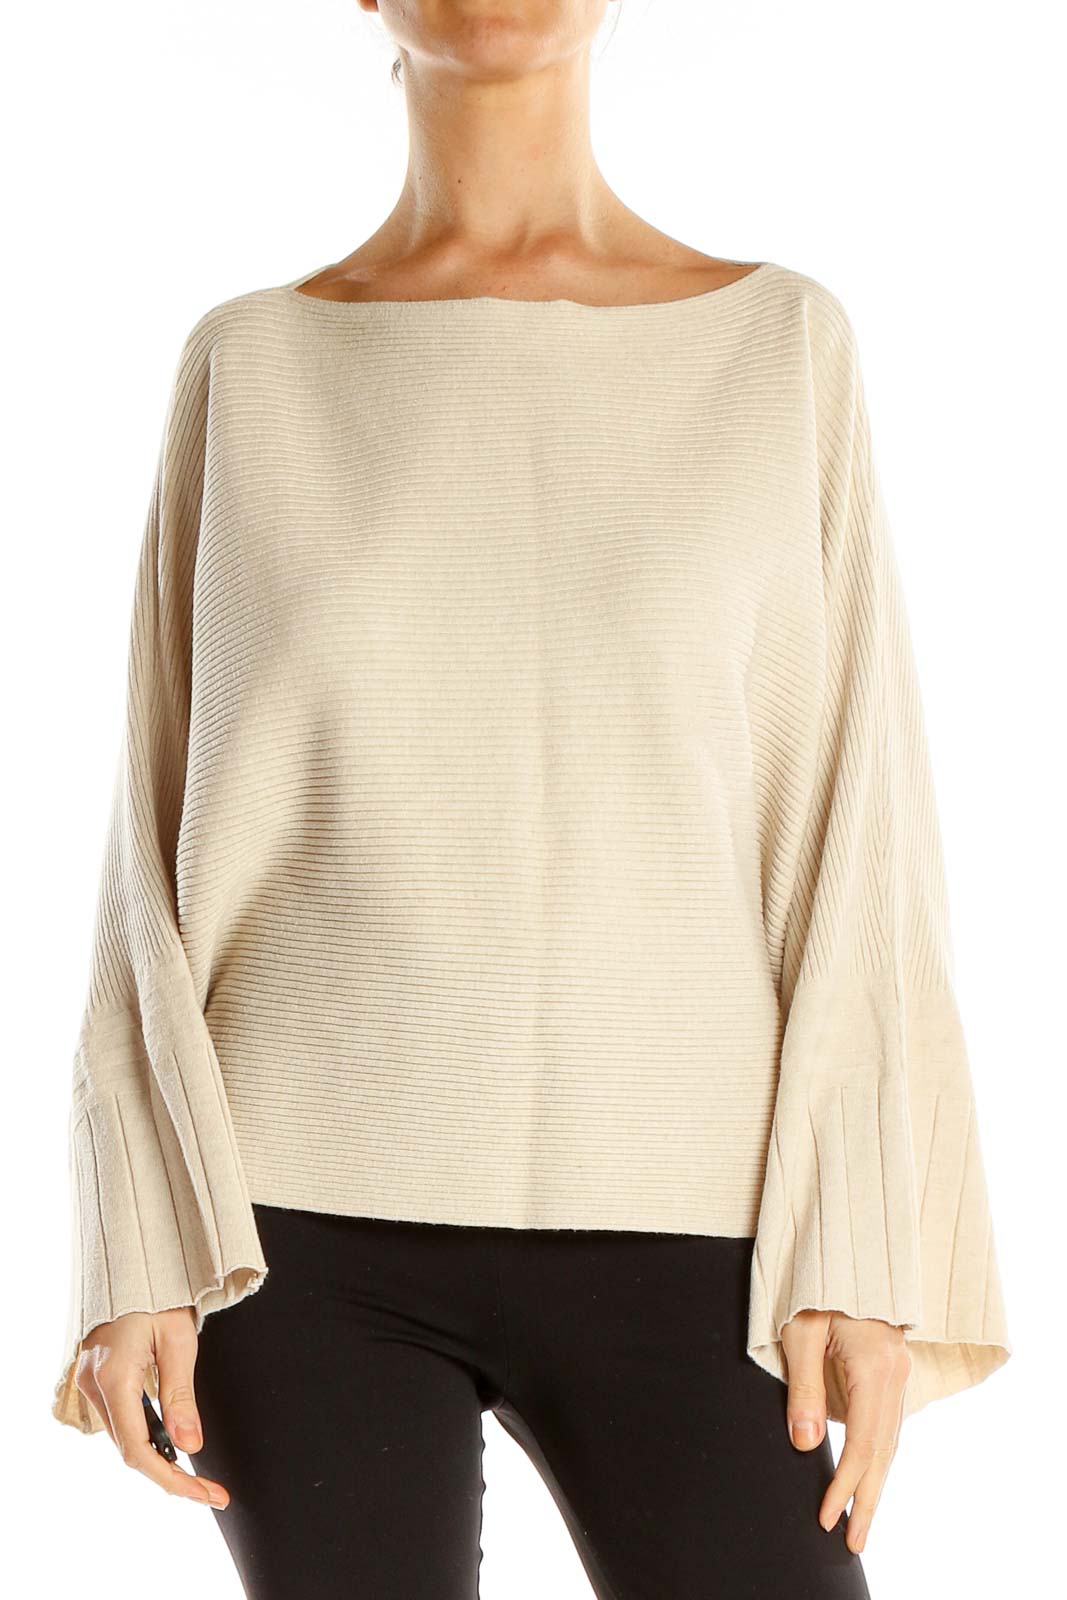 Beige Boat Neck Ribbed All Day Wear Sweater Front